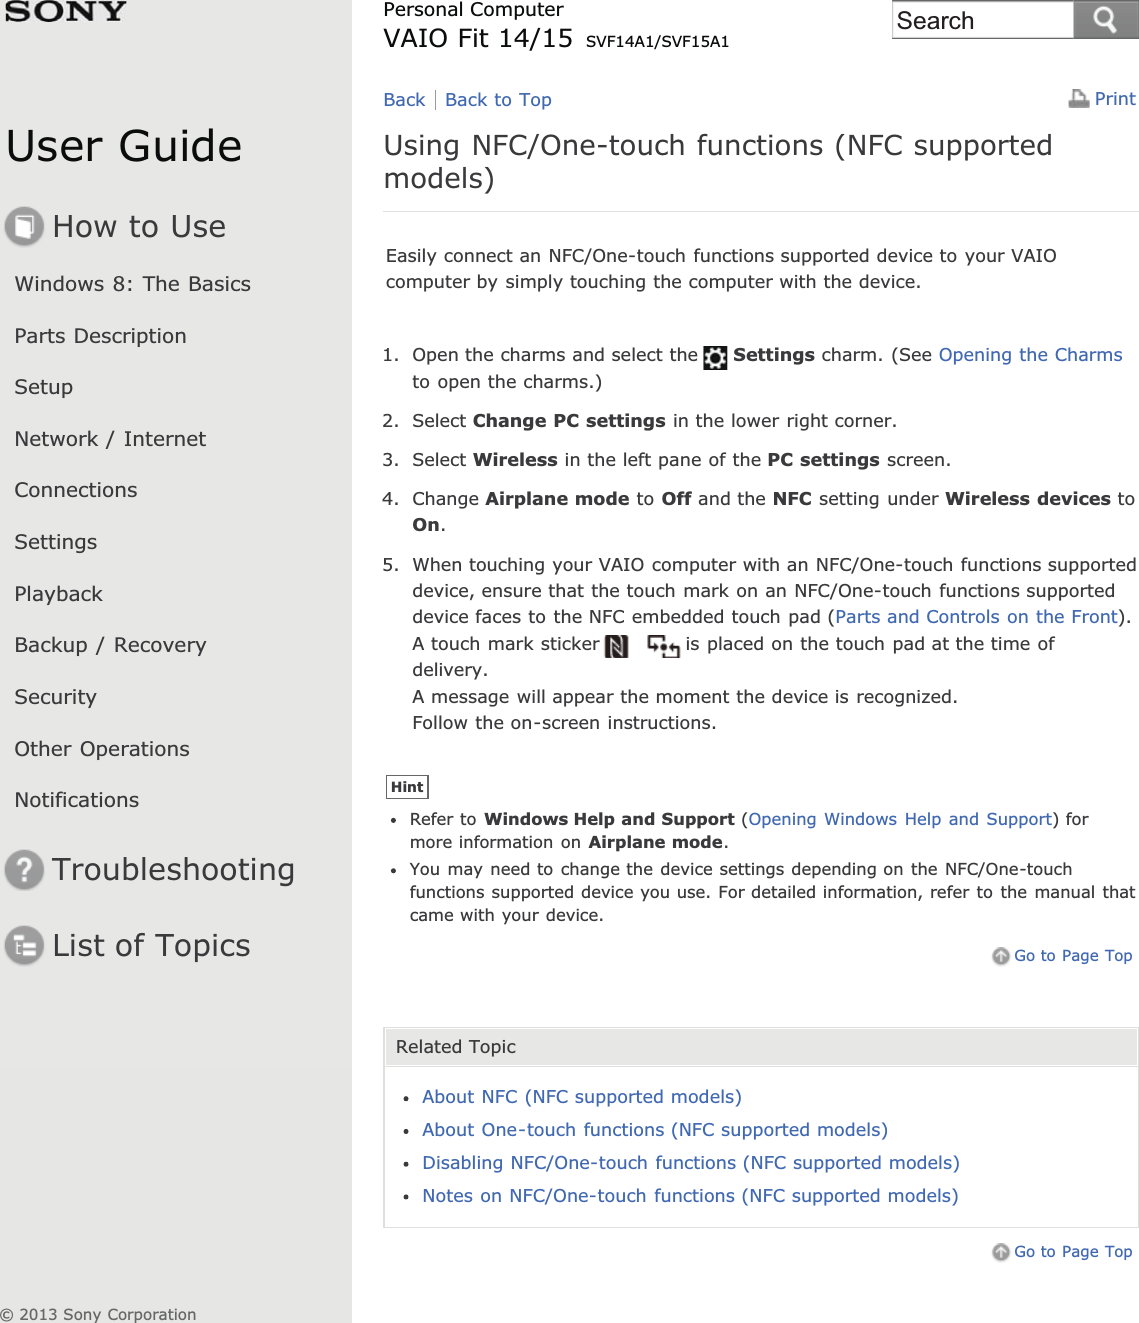 User GuideHow to UseWindows 8: The BasicsParts DescriptionSetupNetwork / InternetConnectionsSettingsPlaybackBackup / RecoverySecurityOther OperationsNotificationsTroubleshootingList of TopicsPrintPersonal ComputerVAIO Fit 14/15 SVF14A1/SVF15A1Using NFC/One-touch functions (NFC supportedmodels)Easily connect an NFC/One-touch functions supported device to your VAIOcomputer by simply touching the computer with the device.1. Open the charms and select the Settings charm. (See Opening the Charmsto open the charms.)2. Select Change PC settings in the lower right corner.3. Select Wireless in the left pane of the PC settings screen.4. Change Airplane mode to Off and the NFC setting under Wireless devices toOn.5. When touching your VAIO computer with an NFC/One-touch functions supporteddevice, ensure that the touch mark on an NFC/One-touch functions supporteddevice faces to the NFC embedded touch pad (Parts and Controls on the Front).A touch mark sticker is placed on the touch pad at the time ofdelivery.A message will appear the moment the device is recognized.Follow the on-screen instructions.HintRefer to Windows Help and Support (Opening Windows Help and Support) formore information on Airplane mode.You may need to change the device settings depending on the NFC/One-touchfunctions supported device you use. For detailed information, refer to the manual thatcame with your device.Go to Page TopRelated TopicAbout NFC (NFC supported models)About One-touch functions (NFC supported models)Disabling NFC/One-touch functions (NFC supported models)Notes on NFC/One-touch functions (NFC supported models)Go to Page TopBack Back to Top© 2013 Sony CorporationSearch